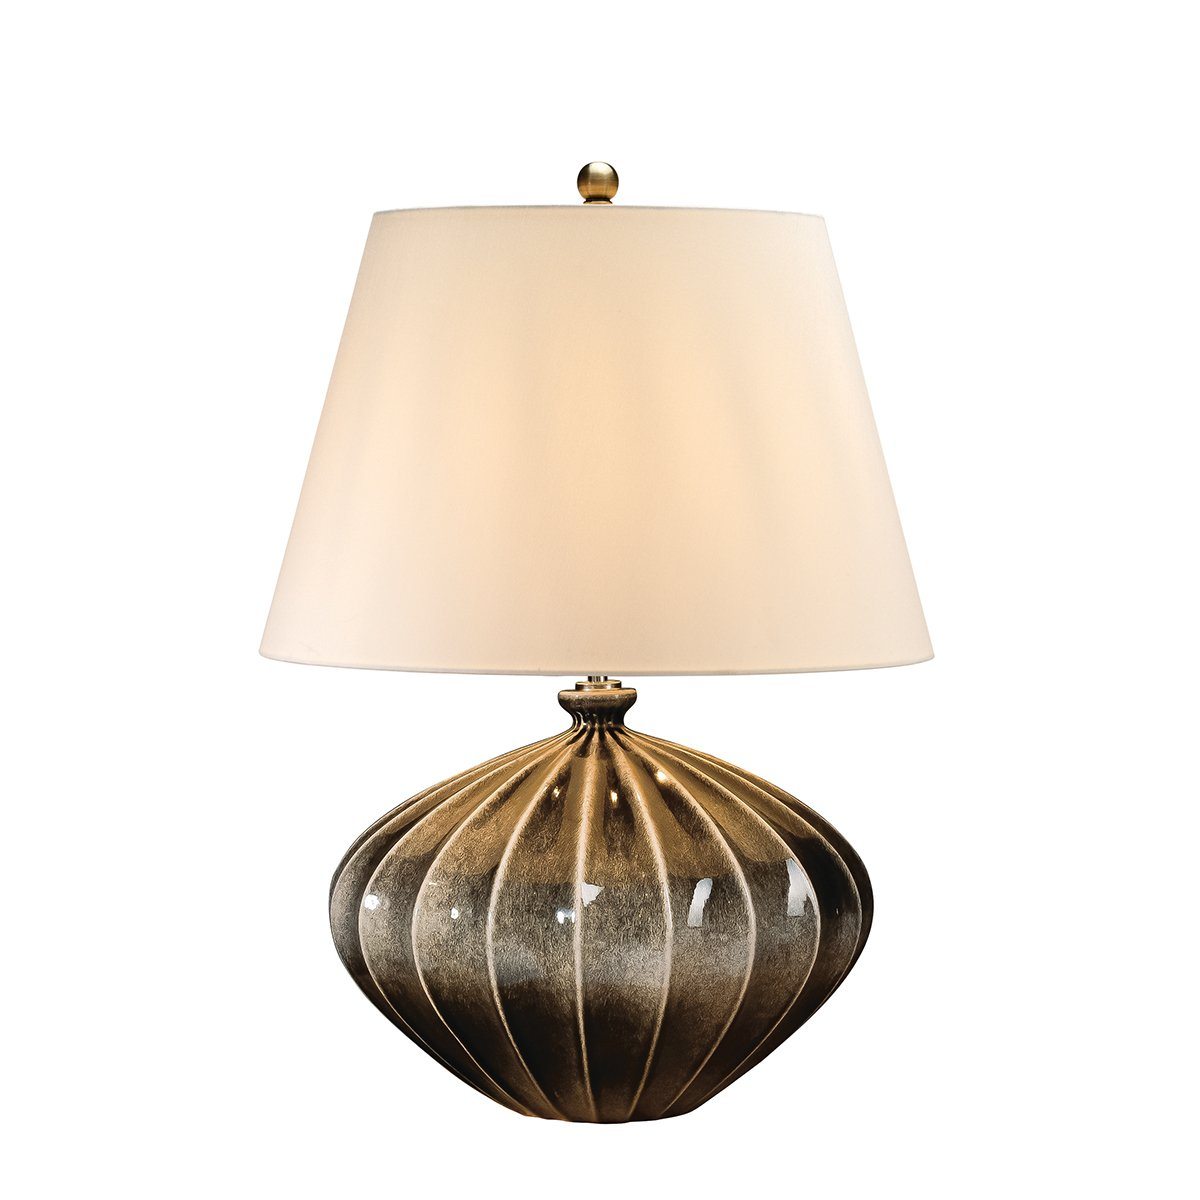 Rotherhithe Table Lamp c/w Shade - ID 8404